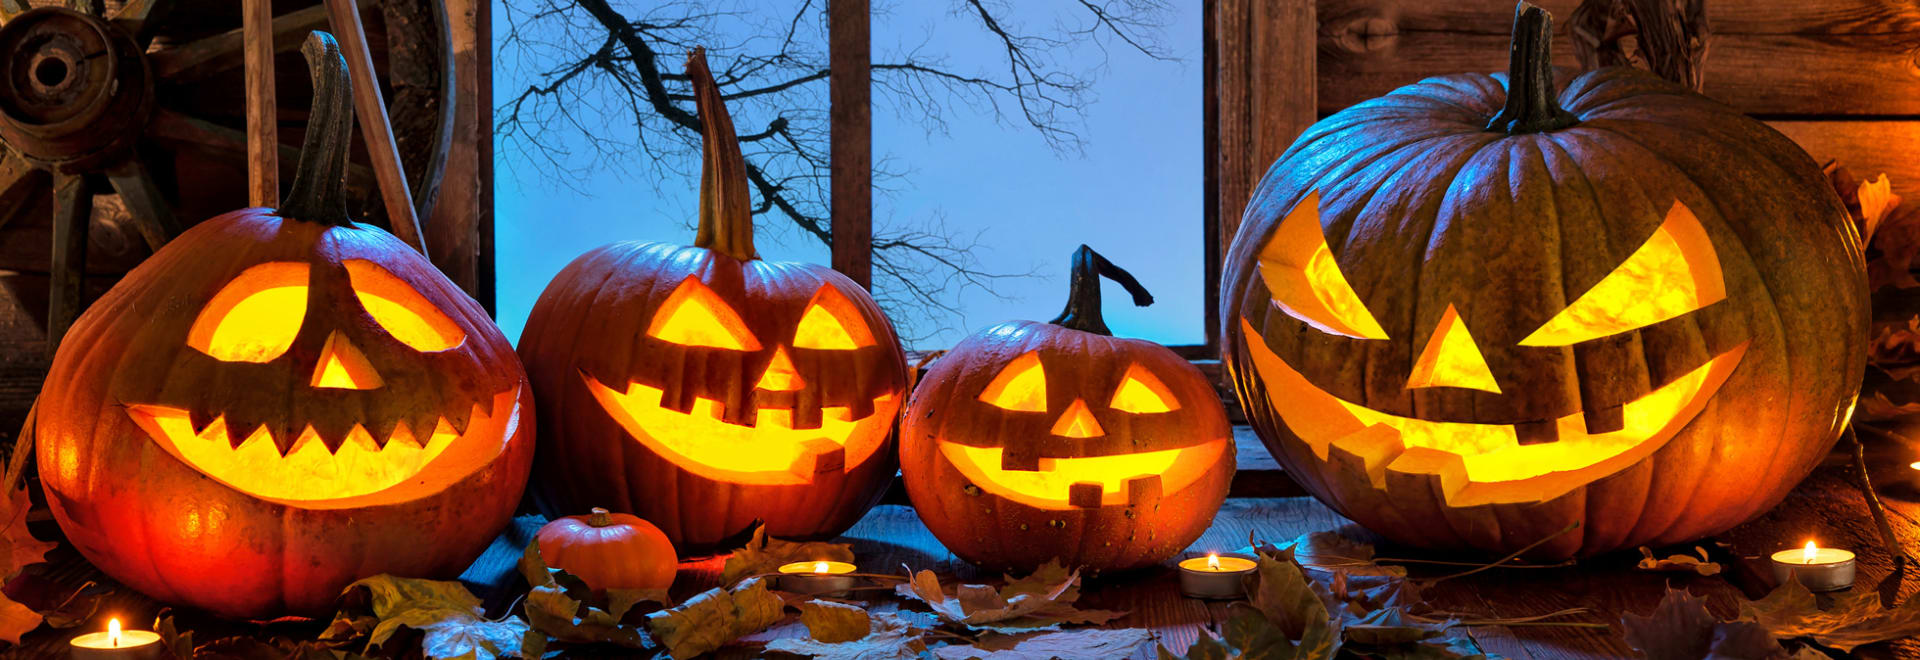 Pumpkin carving safety tips when making jack-o-lanterns like these.